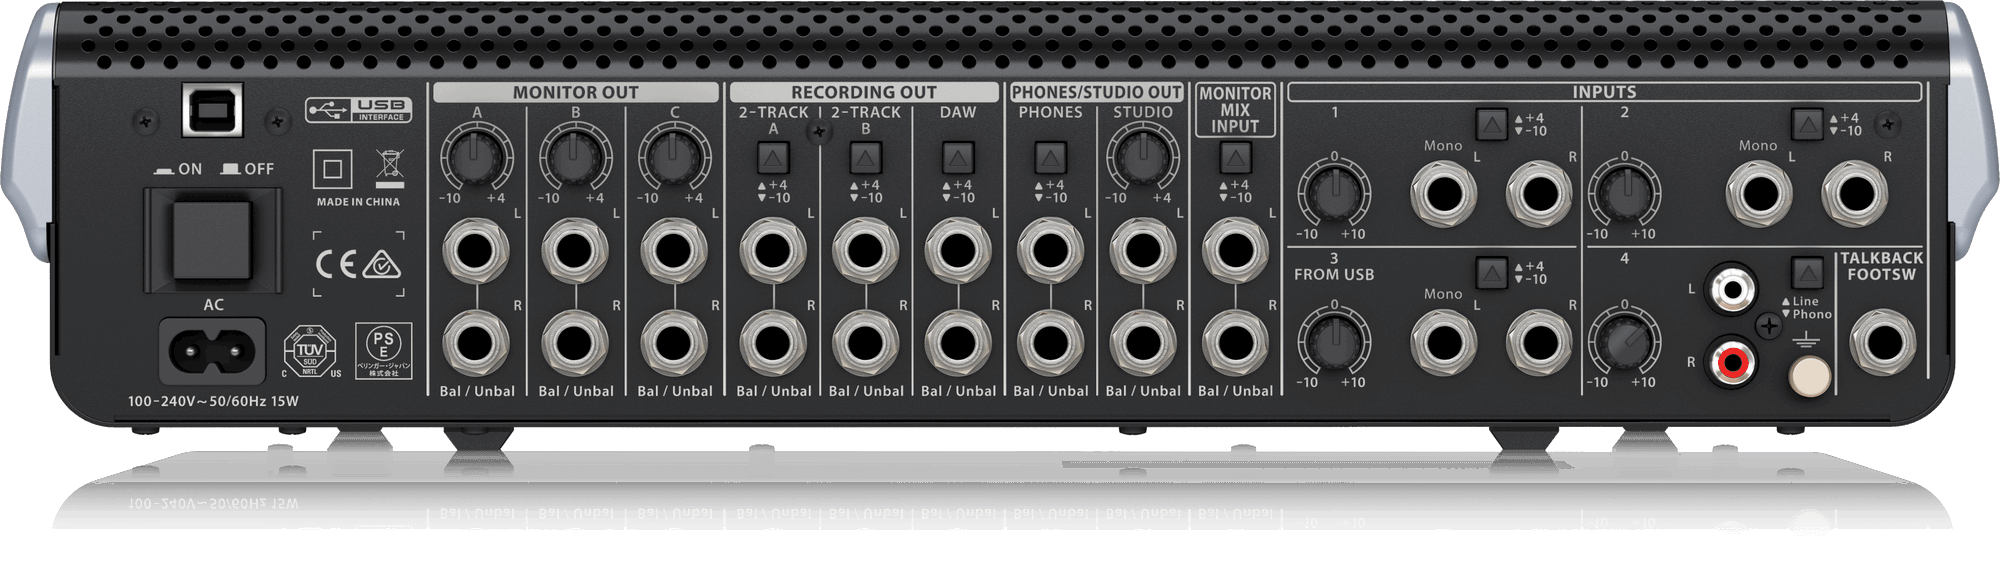 Behringer CONTROL2USB High-end Studio Control with VCA Control and USB Audio Interface | BEHRINGER , Zoso Music